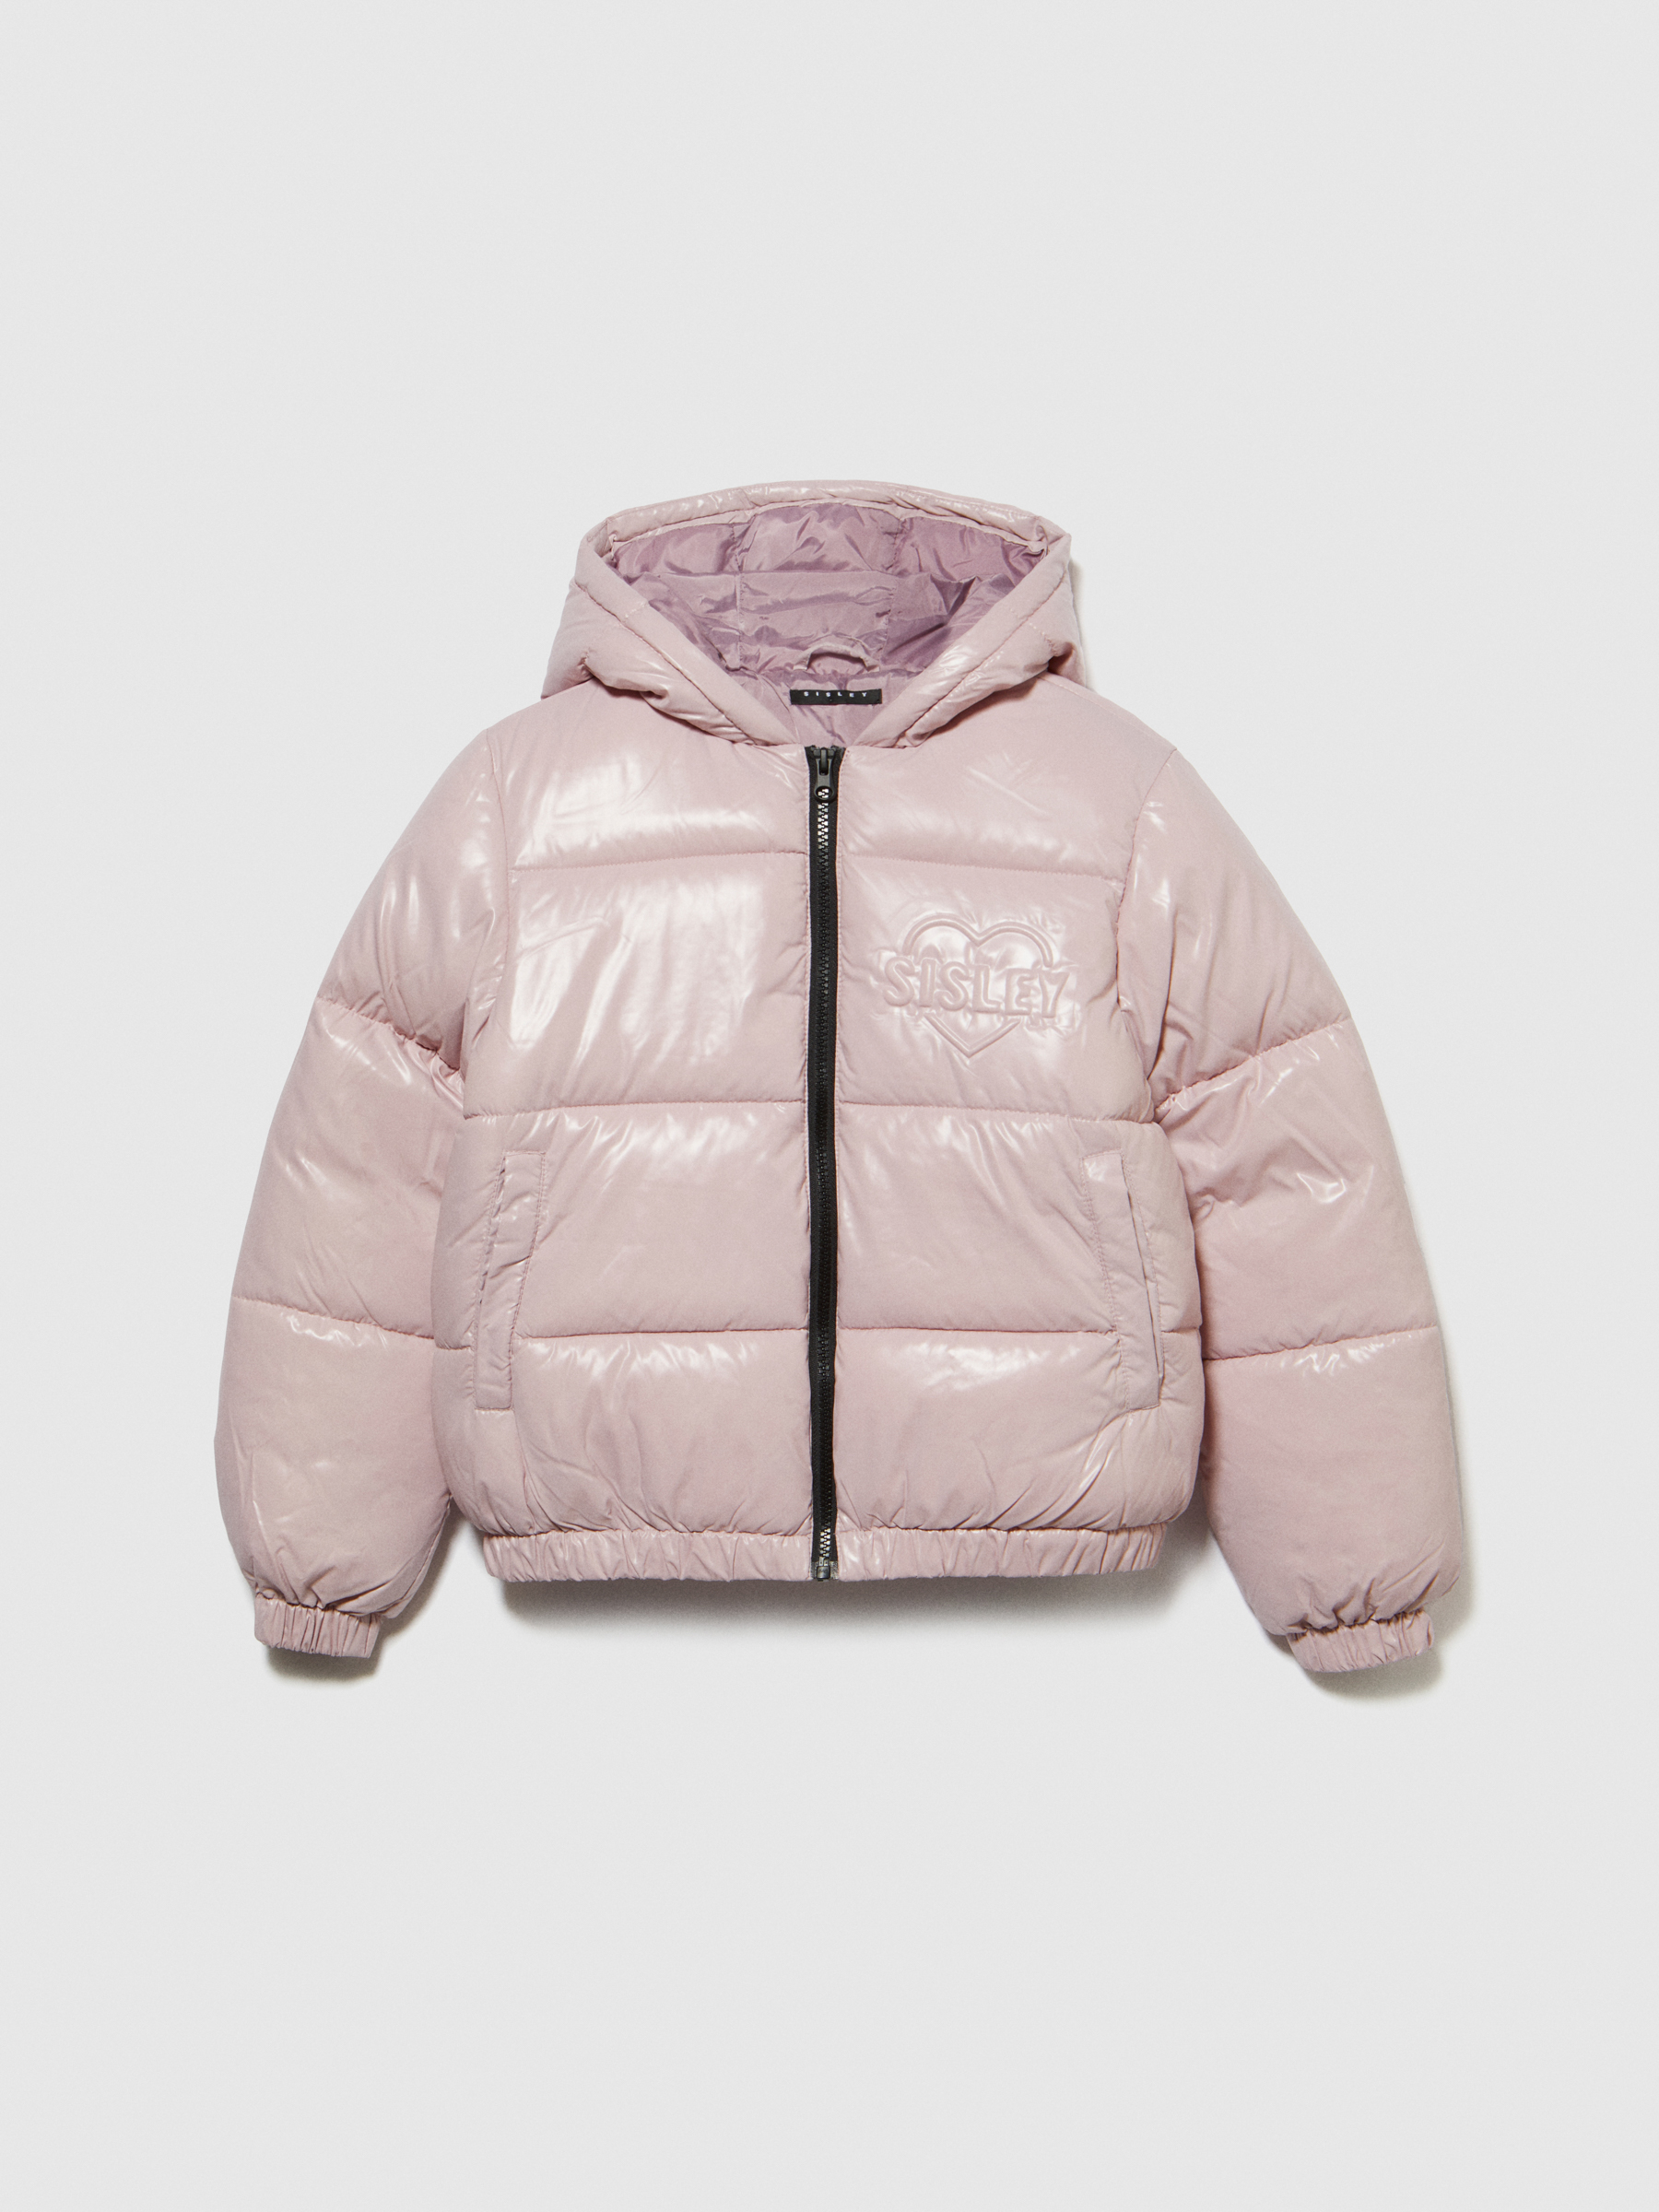 Sisley Young - Padded Jacket With Embossed Print, Woman, Pastel Pink, Size: KL